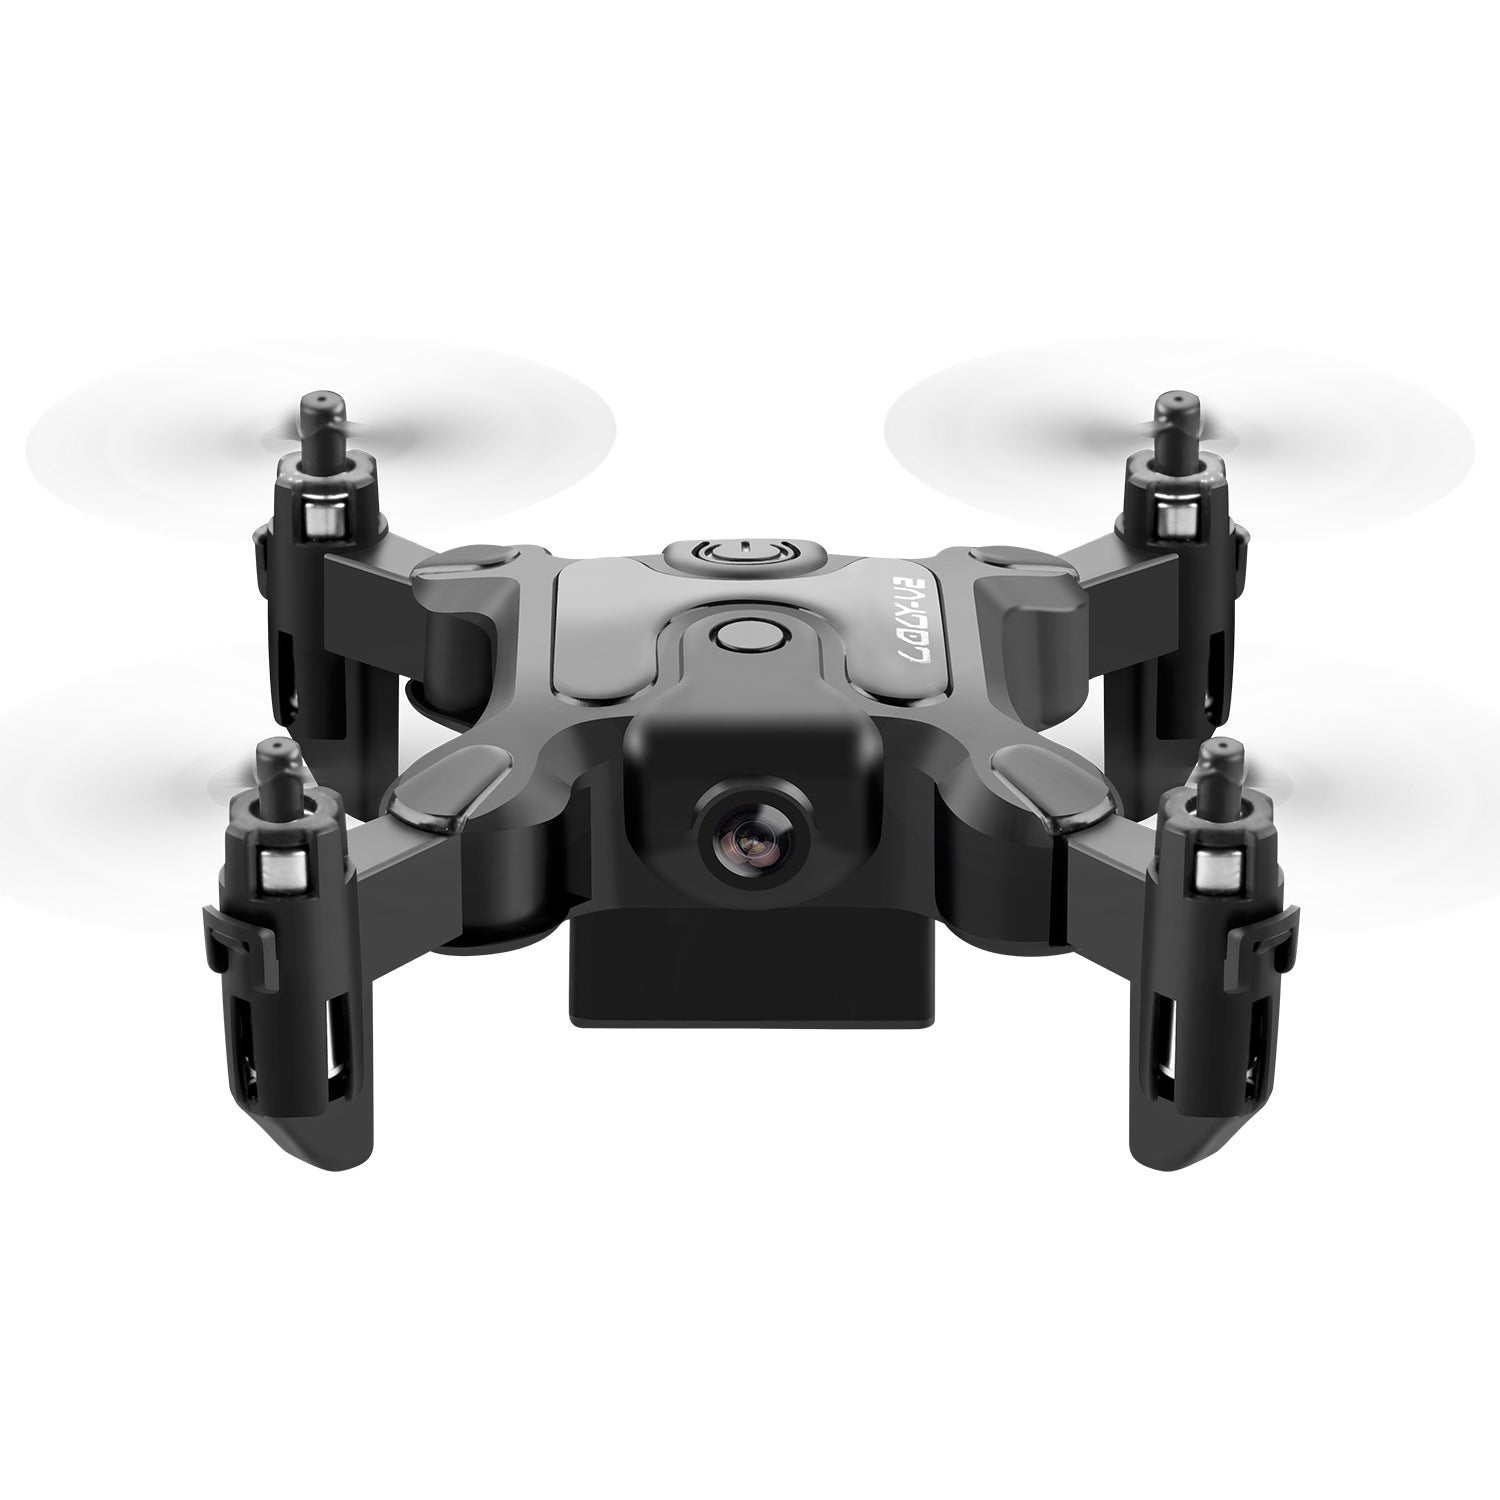 Details about   4DRC V2 Mini Drone Selfie WIFI FPV With HD Camera Foldable Arm RC Quadcopter Toy 